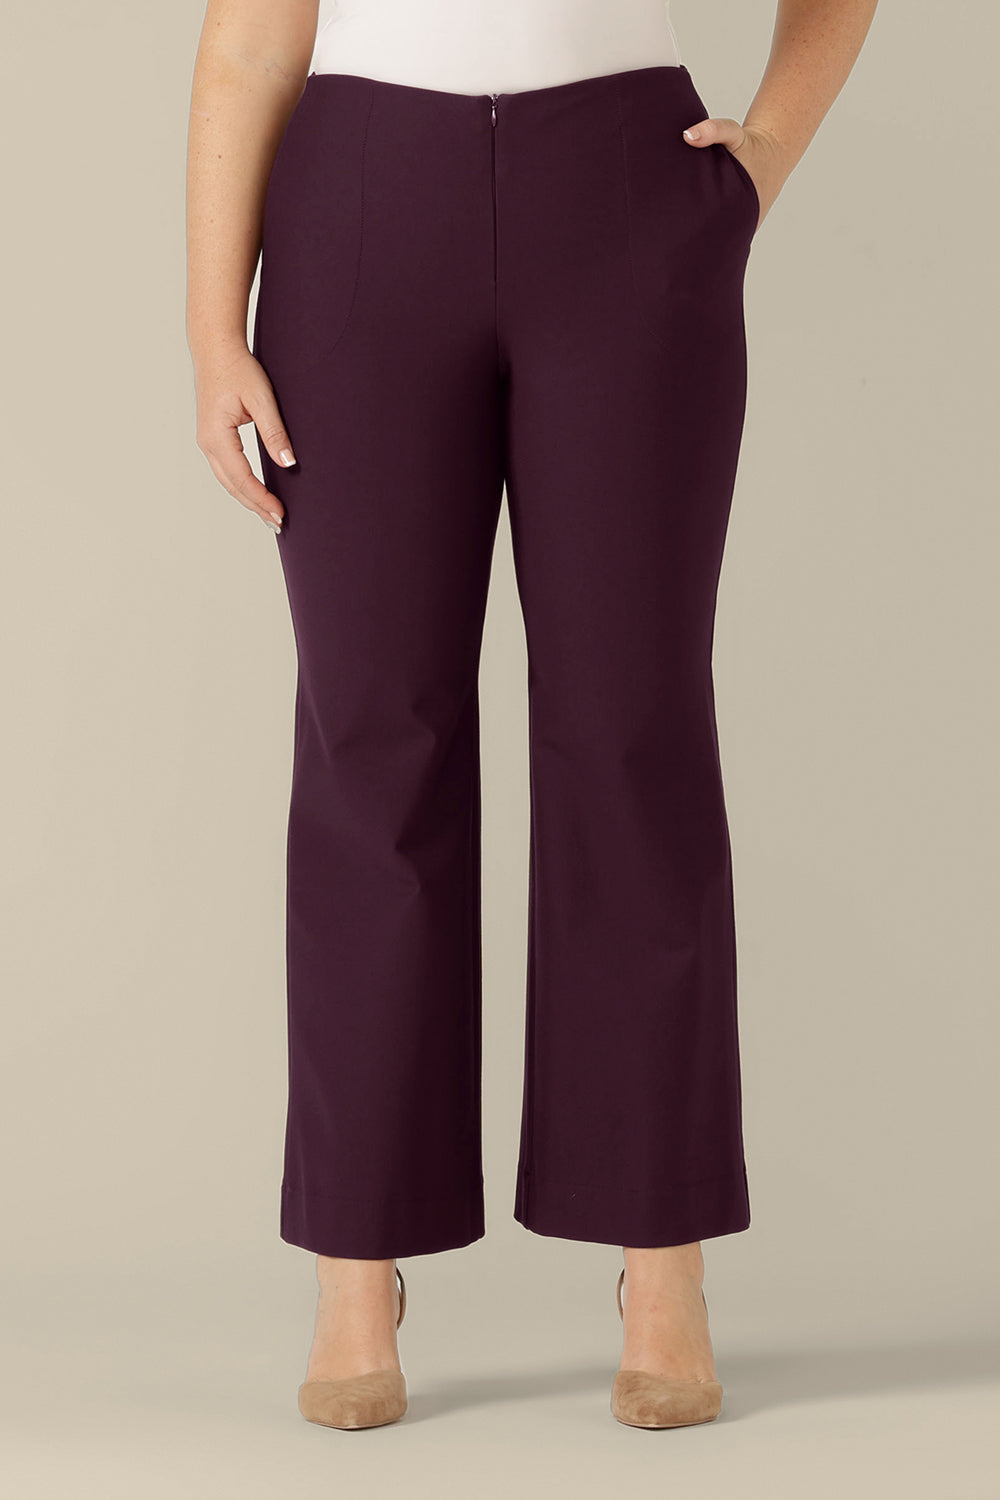 Good for workwear or evening wear pants, these mulberry trousers, shown in a size 12, by Australia and New Zealand women's fashion label, L&F feature full-length, boot-cut flared legs. 